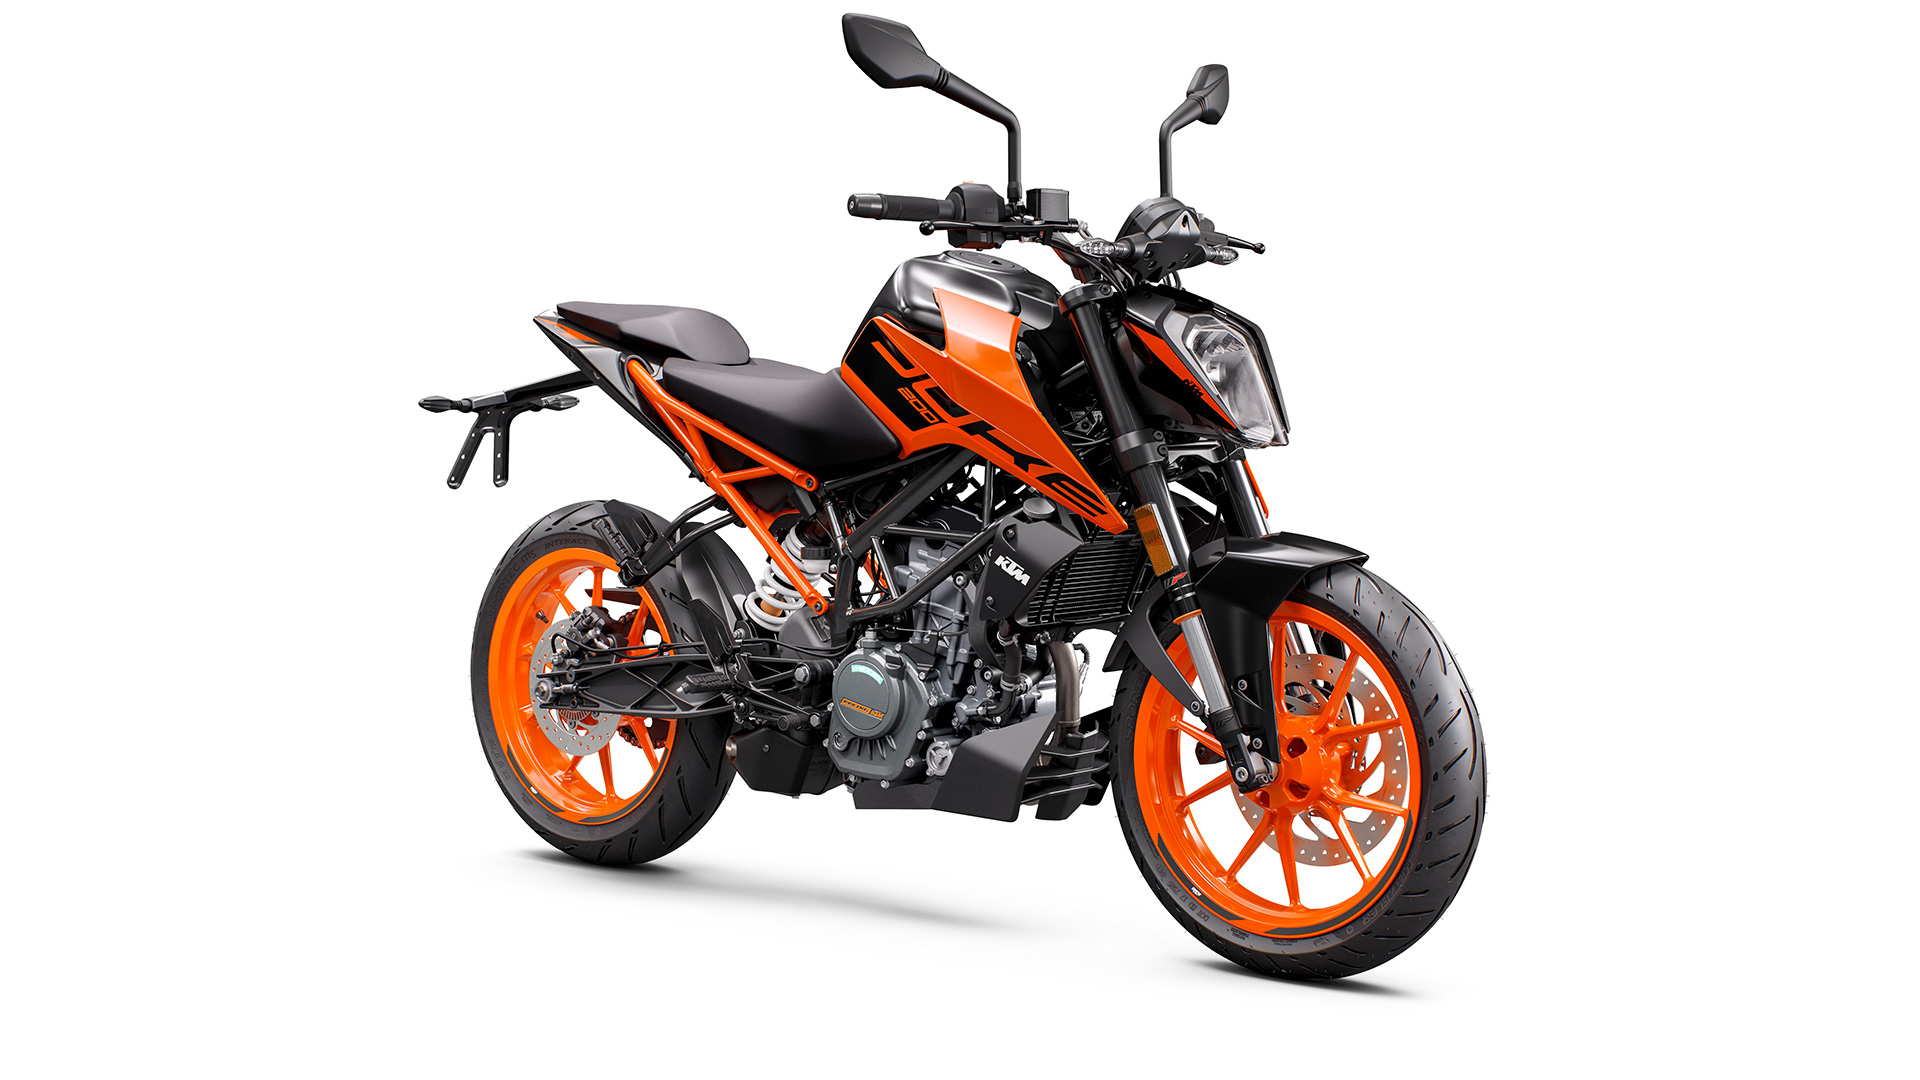 KTM 200 Duke 2020 - Price, Mileage, Reviews, Specification, Gallery ...